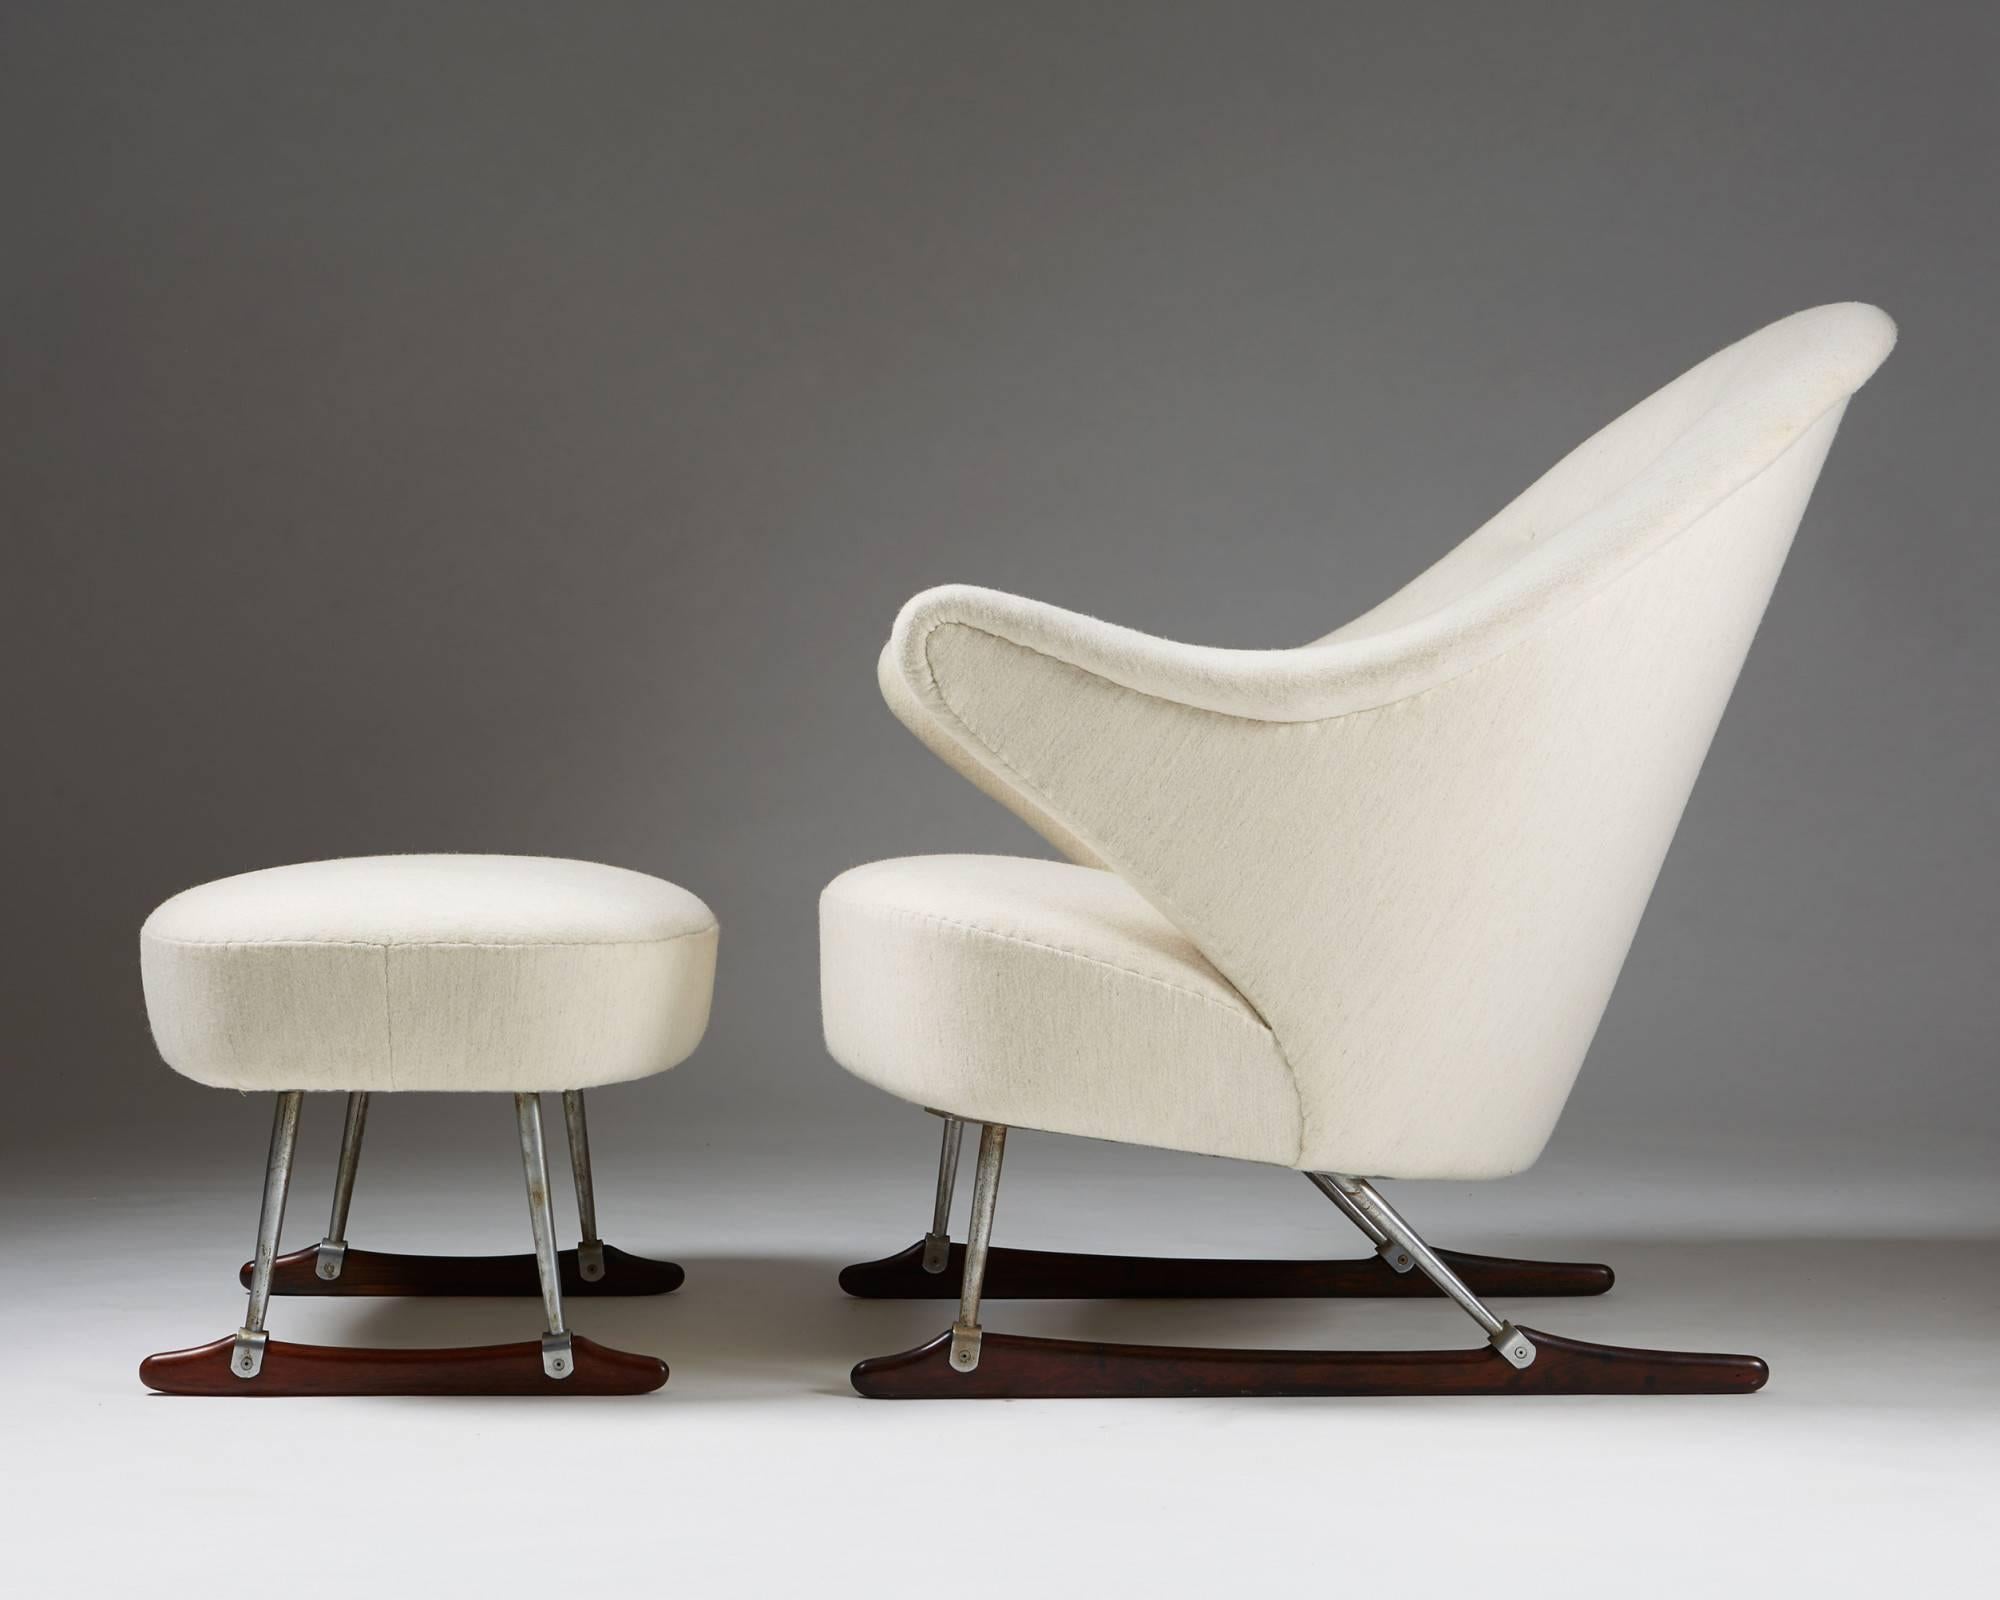 Scandinavian Modern Sleigh Chair and footstool by Børge Mogensen for Tage M Christensen & Co, 1953 For Sale